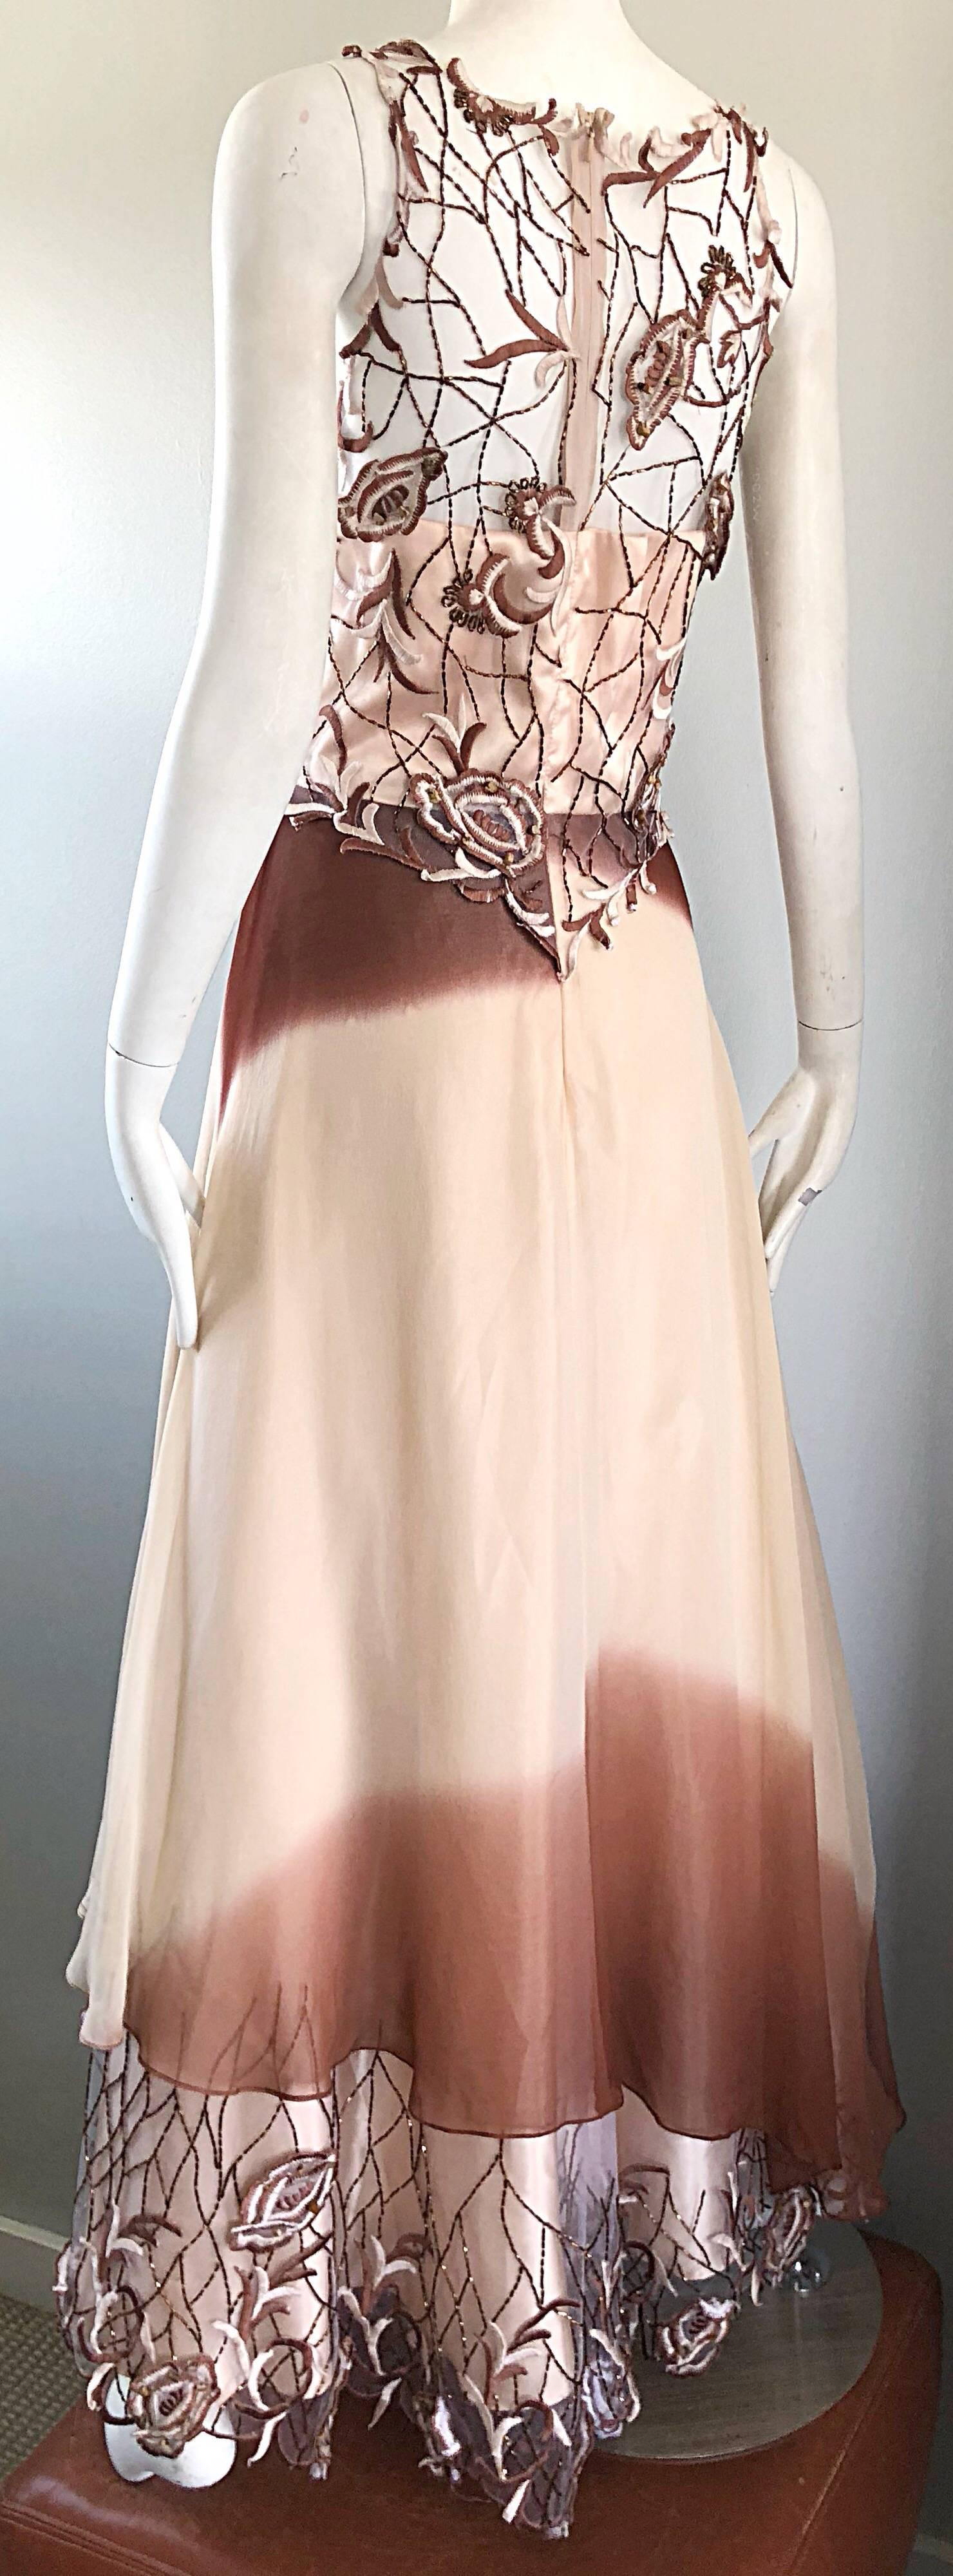 Max Nugus Haute Couture 1990s Size 6 8 Pink Brown Ombre Chiffon Vintage 90s Gown For Sale 2